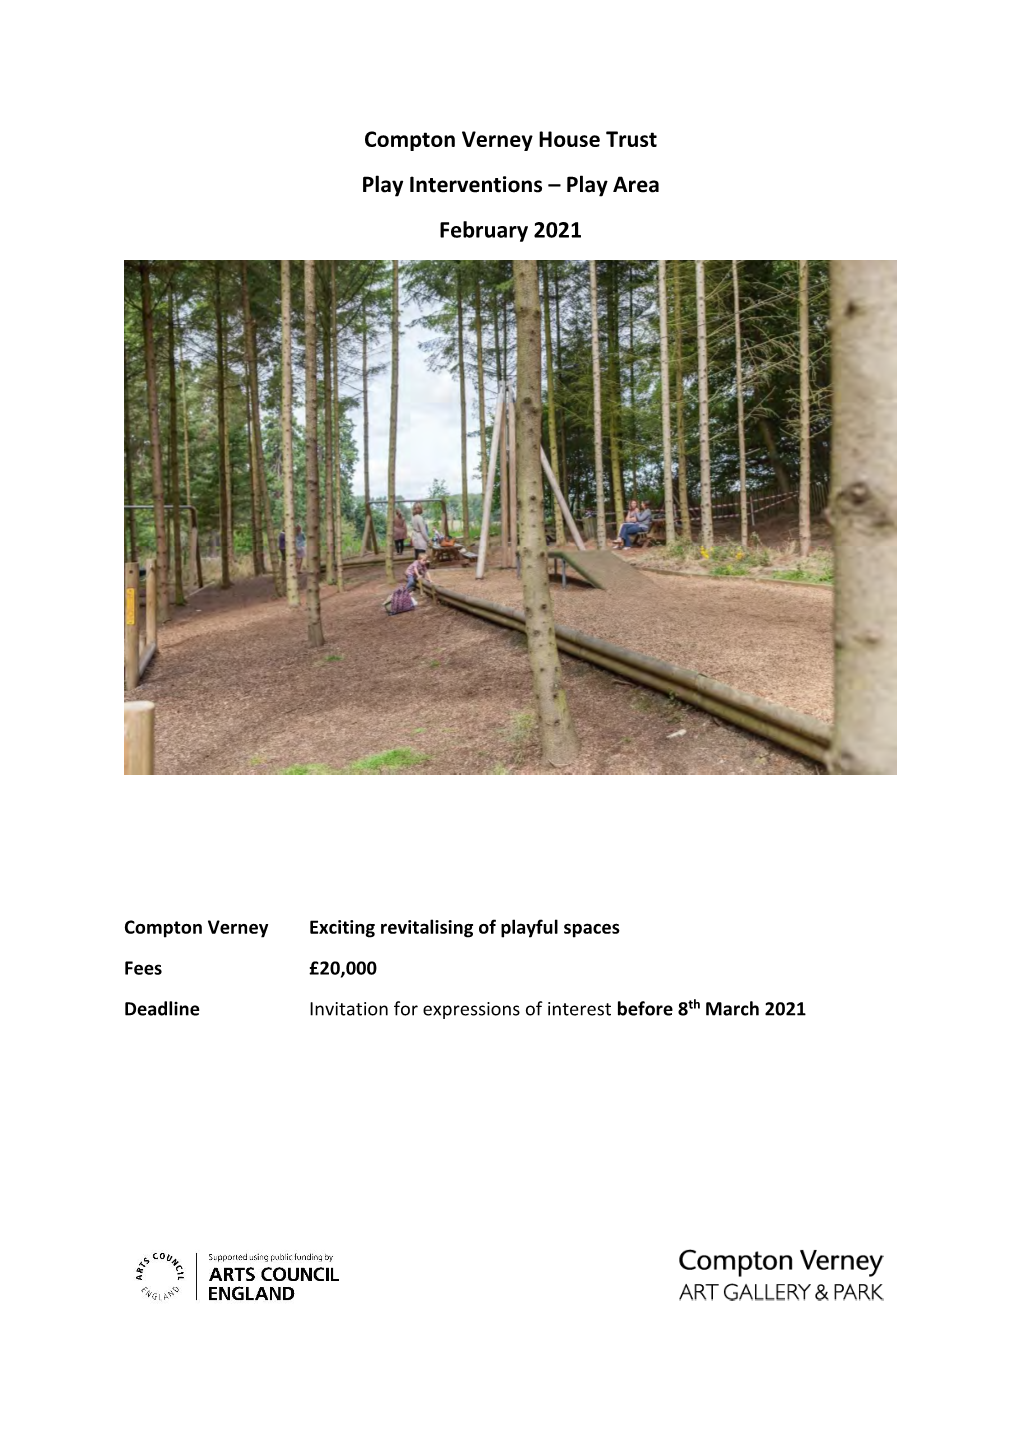 Compton Verney House Trust Play Interventions – Play Area February 2021